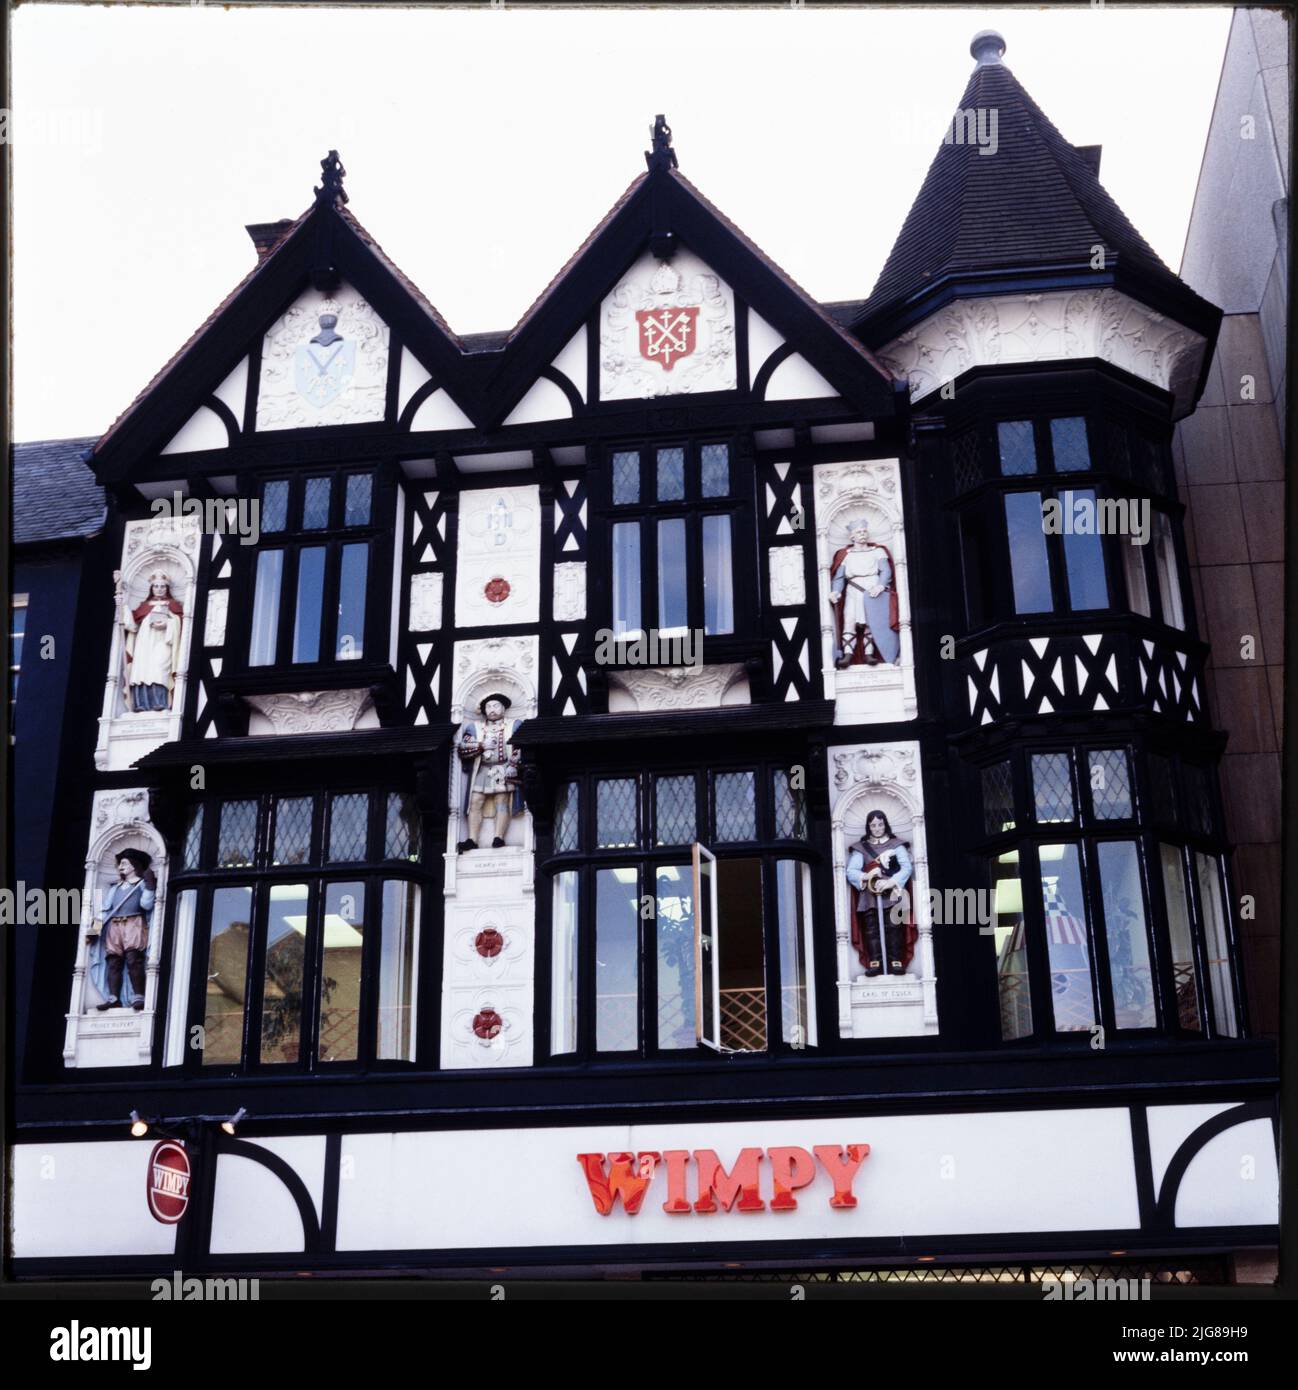 Cathedral Square, Peterborough, City of Peterborough, 1970s-1990s. The half-timbered upper elevation of 8 Cathedral Square, built as a Boots store, with painted statues in niches flanking the upper floor windows. The Boots store in Cathedral Square was is dated 1911, and was designed by Boots' in-house architect Michael Vyne Treleaven. The statues on the facade were sculpted by Gilbert Seale &amp; Son of Camberwell, London, and depict Athelwold, King Peada of Mercia, Henry VIII, Prince Rupert and the Earl of Essex. The premises were later occupied by Wimpy and Burger King restaurants. Stock Photo